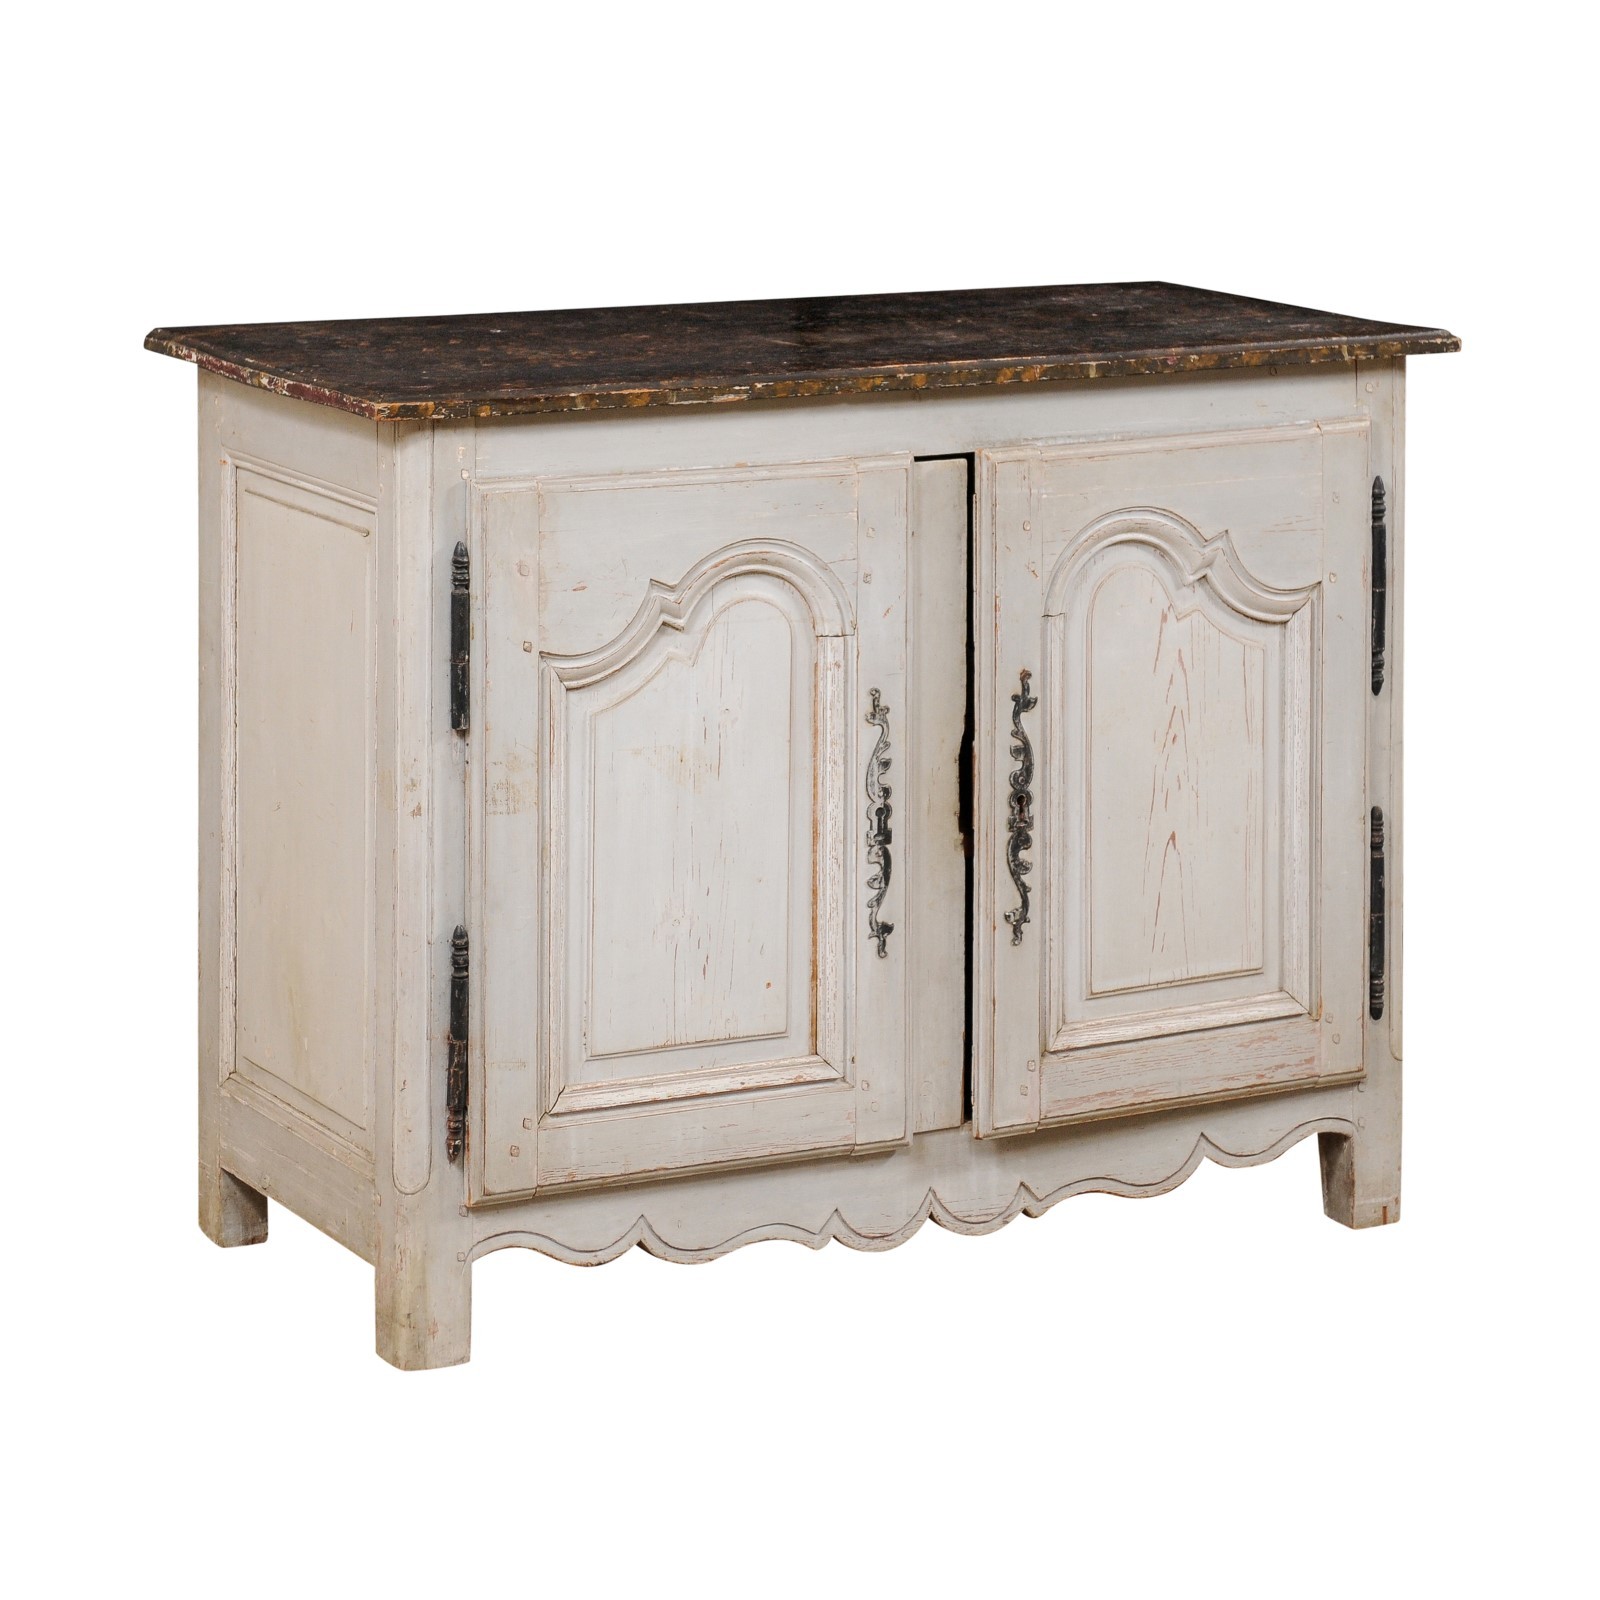 French Painted Buffet Cabinet, Late 18th C.